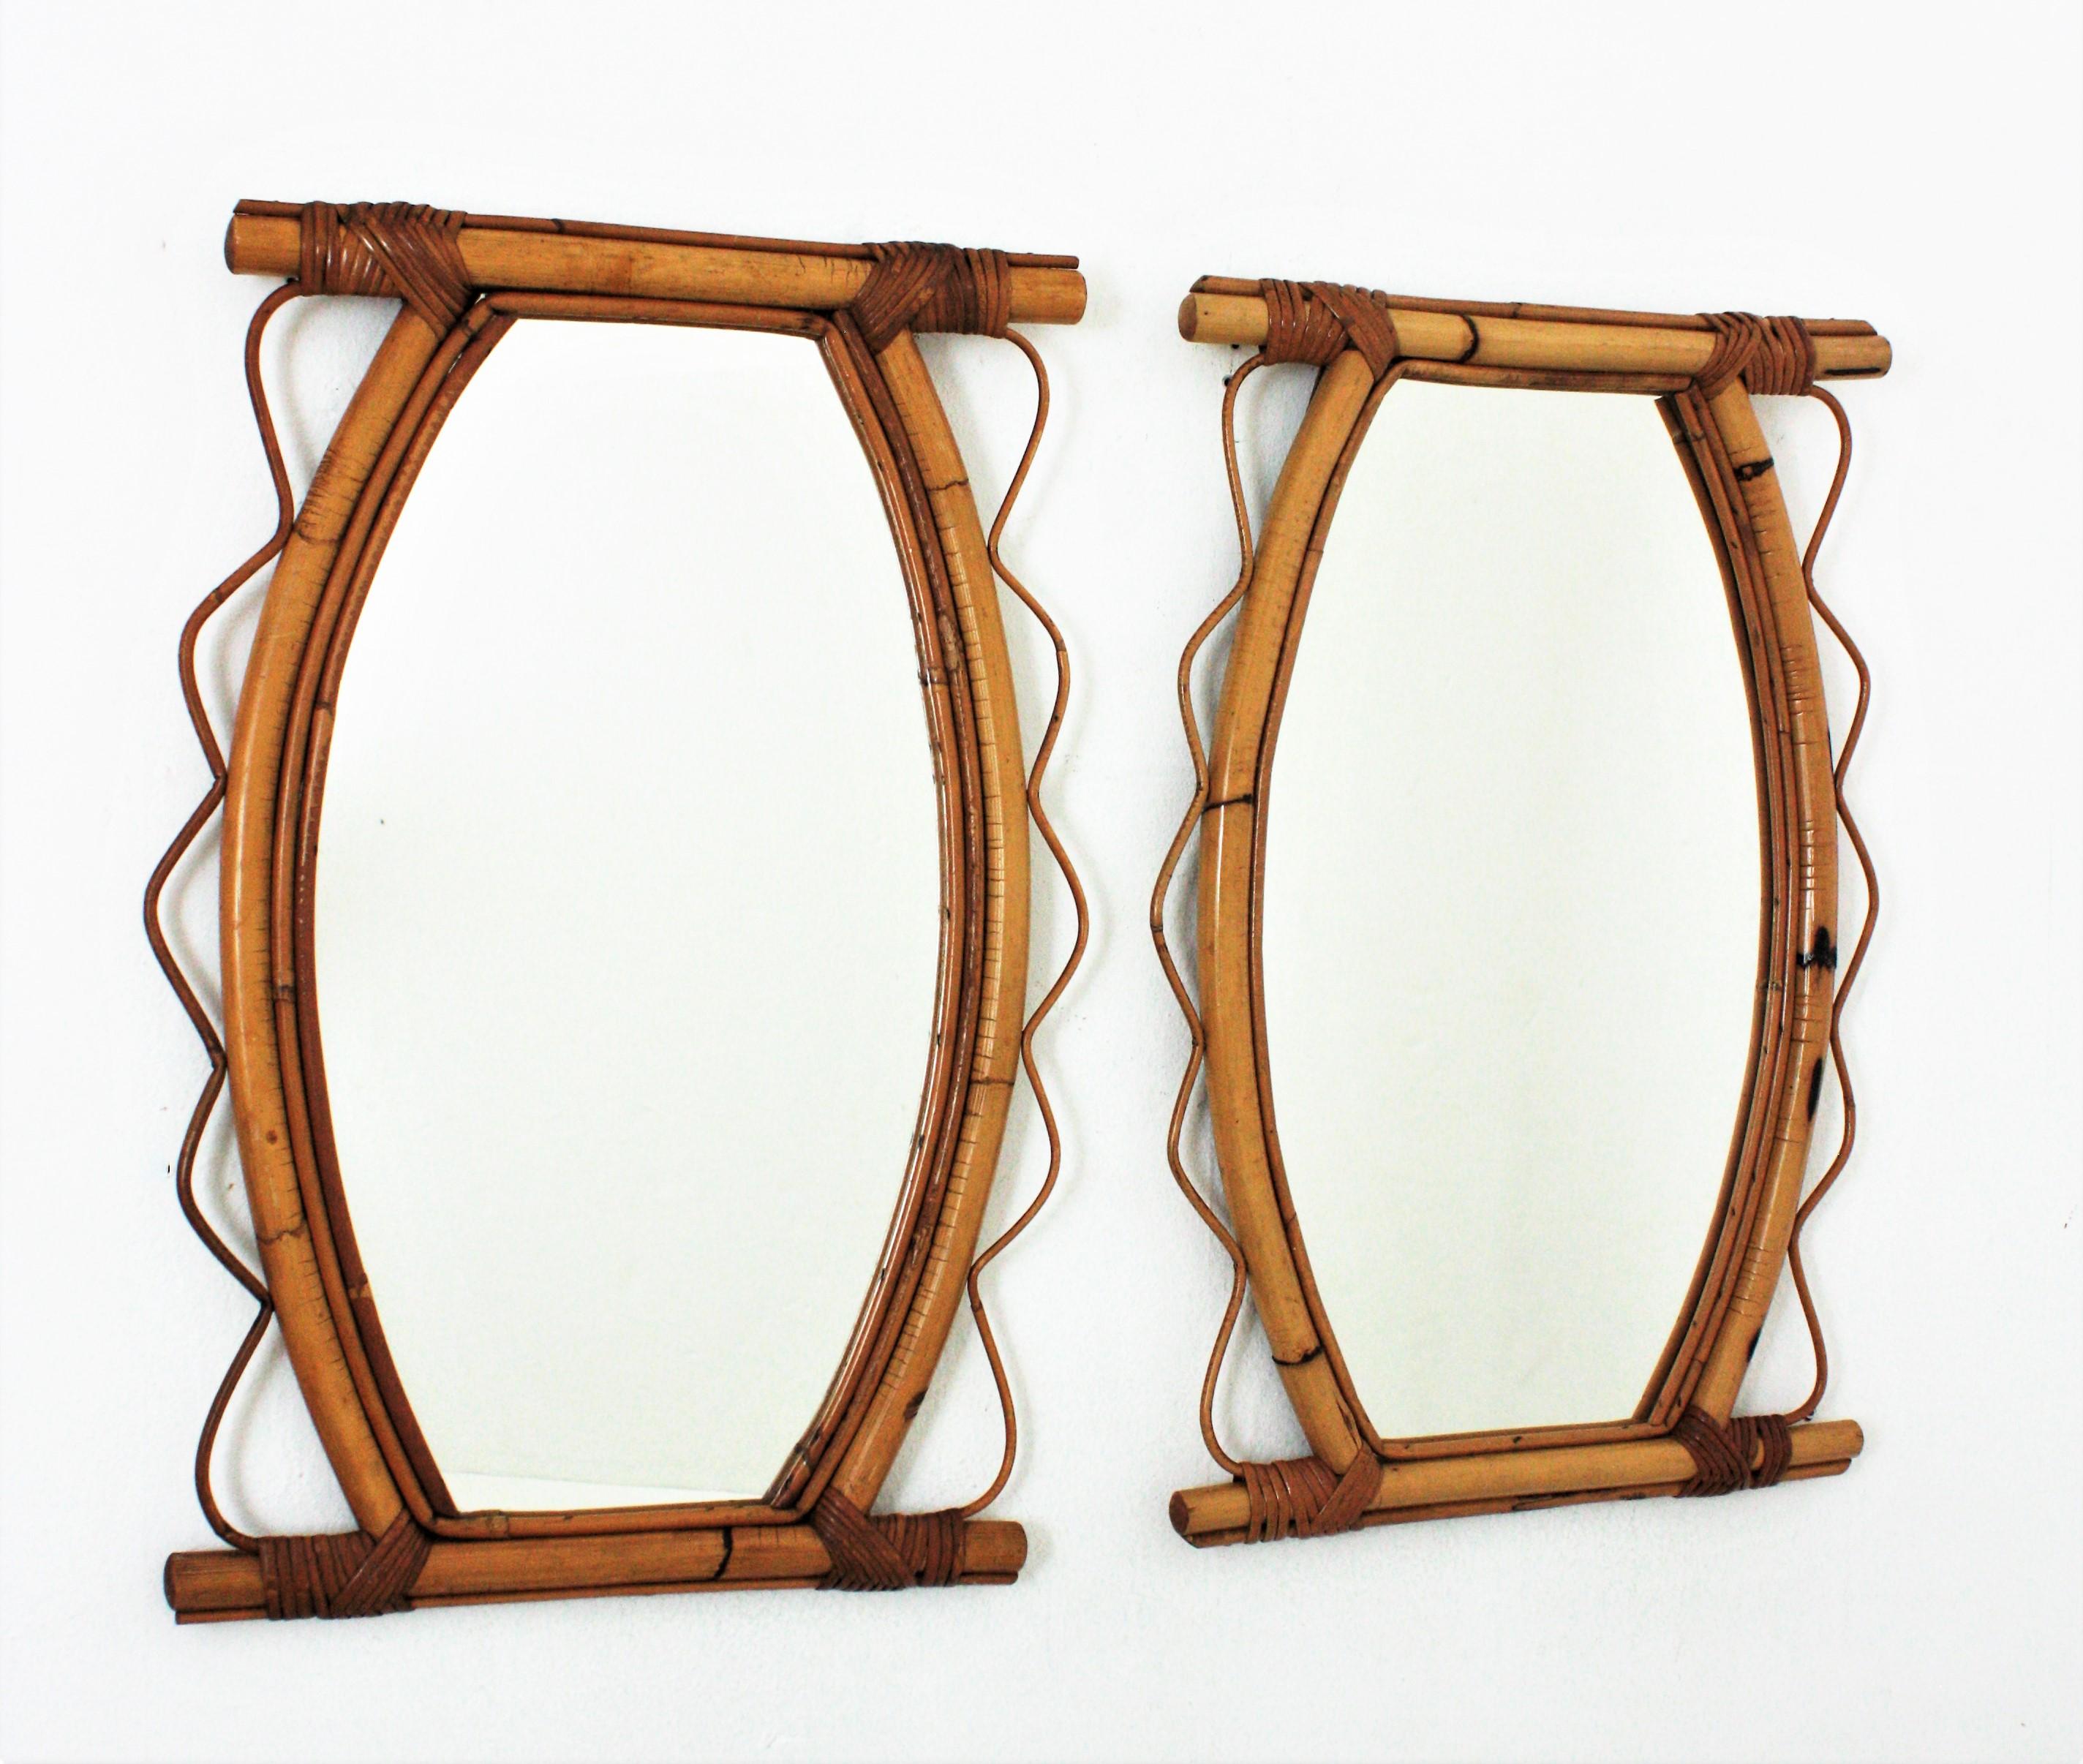 A pair of eye-catching handcrafted bamboo and rattan mirrors with scalloped detailing surrounding the frame. France, 1950s-1960s.
These Mediterranean wall mirrors feature a bamboo / thick rattan frame surrounded by jagged rattan details on both